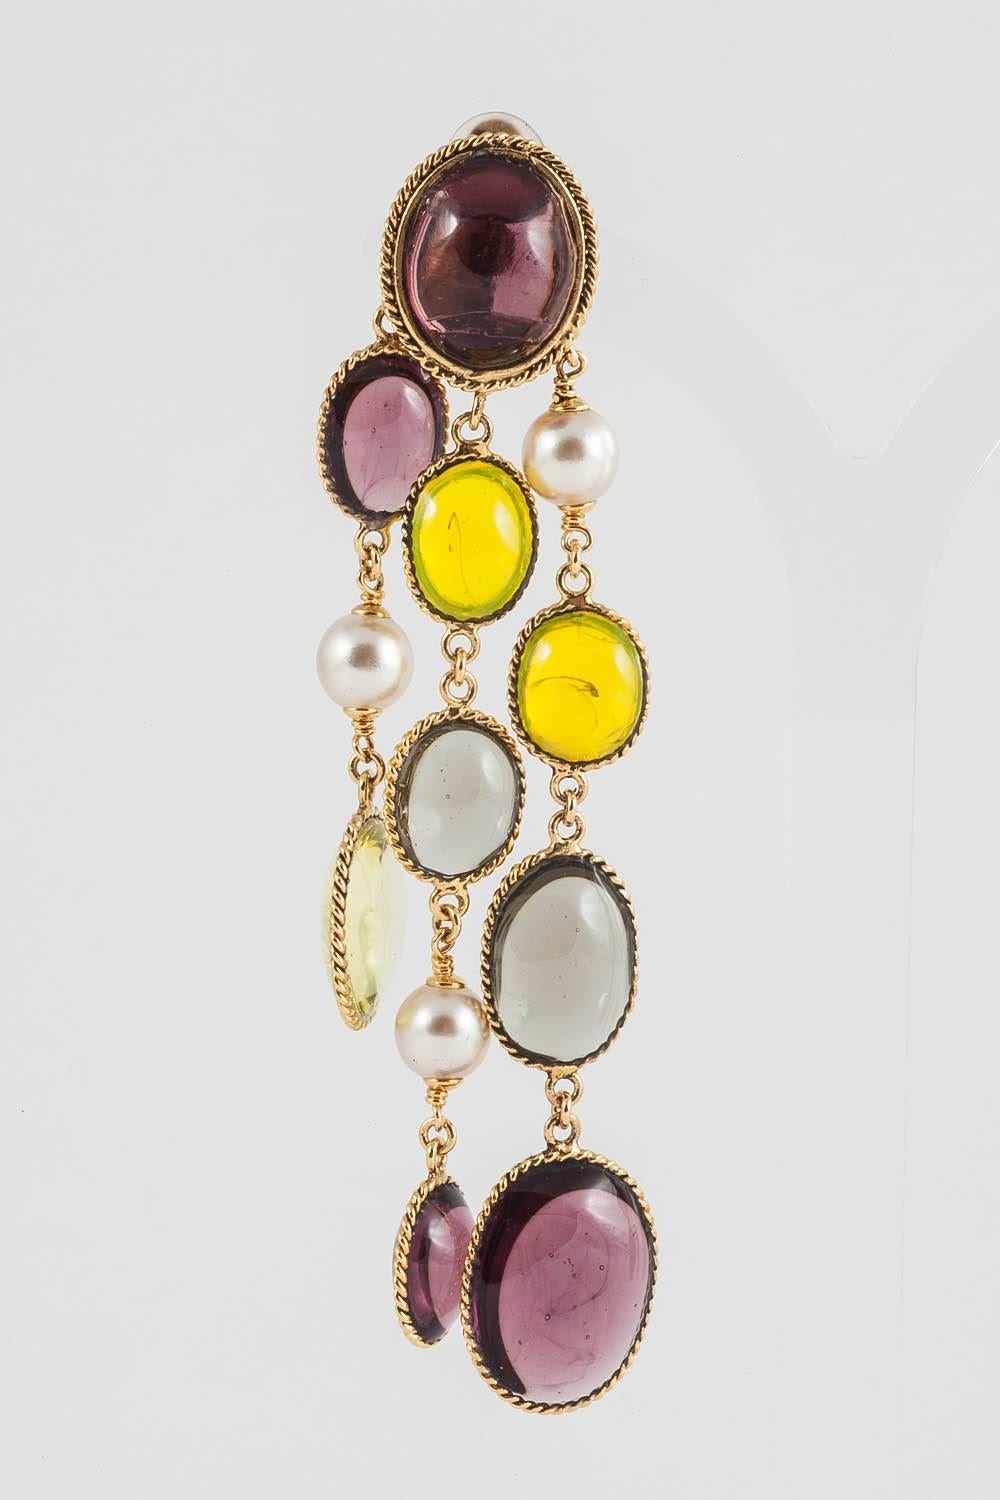 Chic and elegant articulated signed drop earrings in cascading hues of transparent amethyst, grey, opaline yellow poured glass,mixed with pearls, from the 'Harlequin' range in the WW collection, a contemporary limited edition, designed in London,